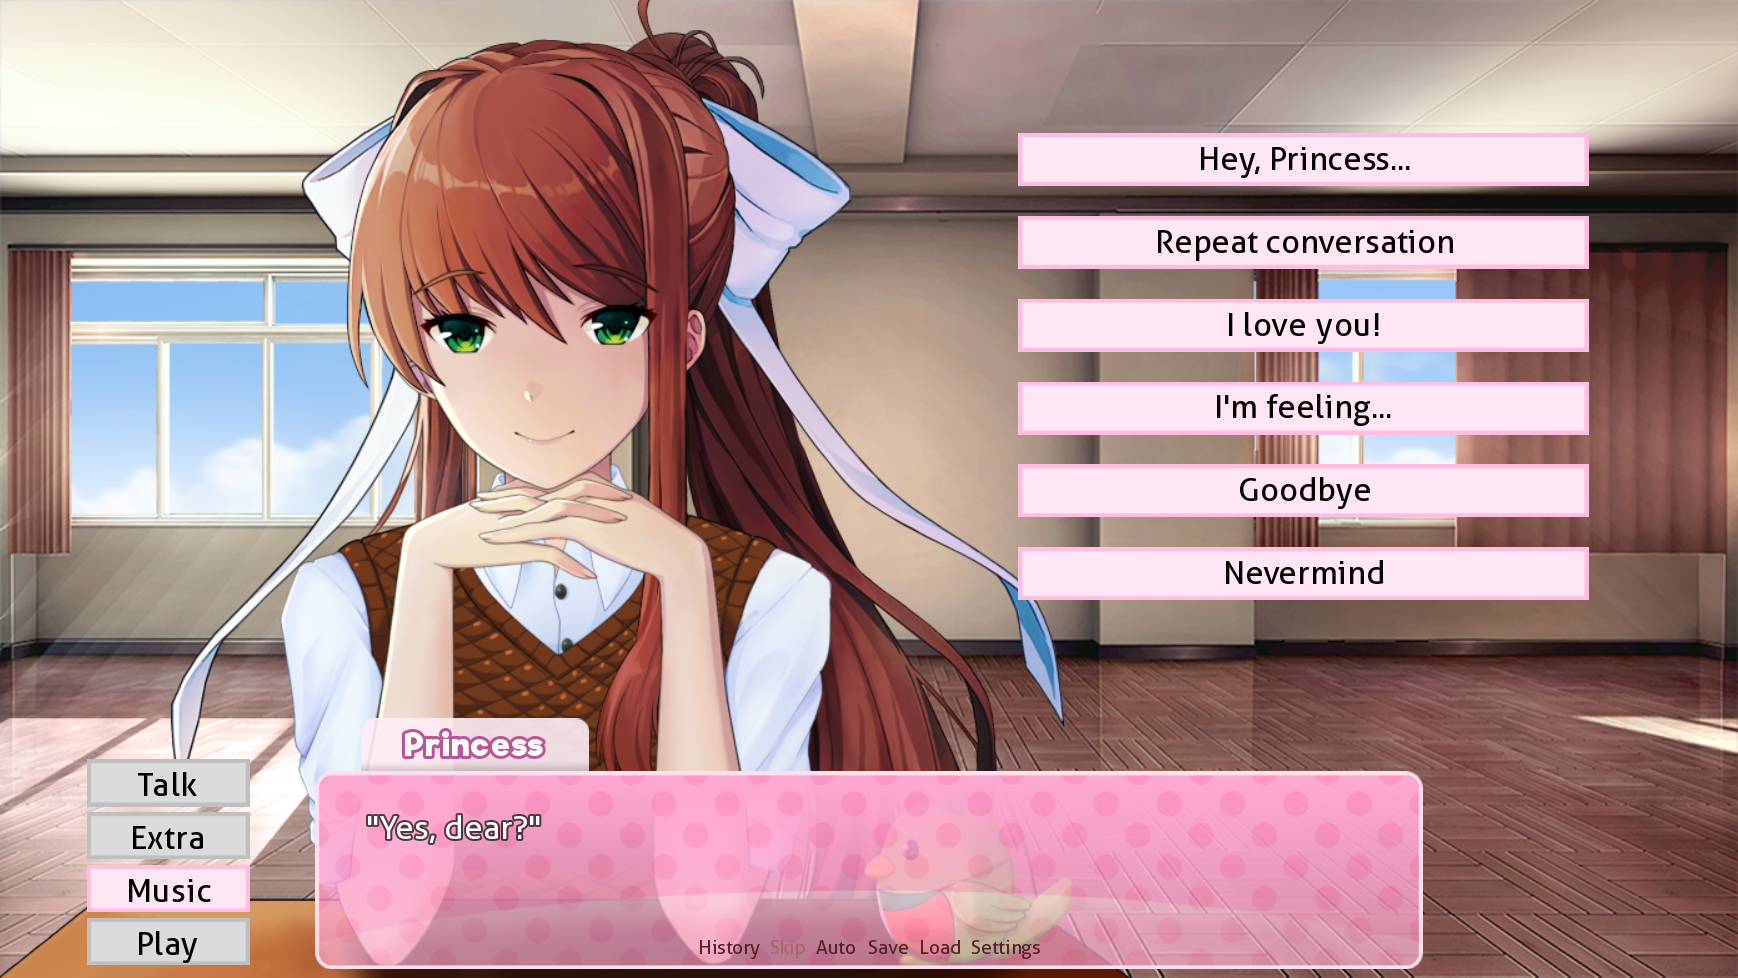 I have a lot of Monika's